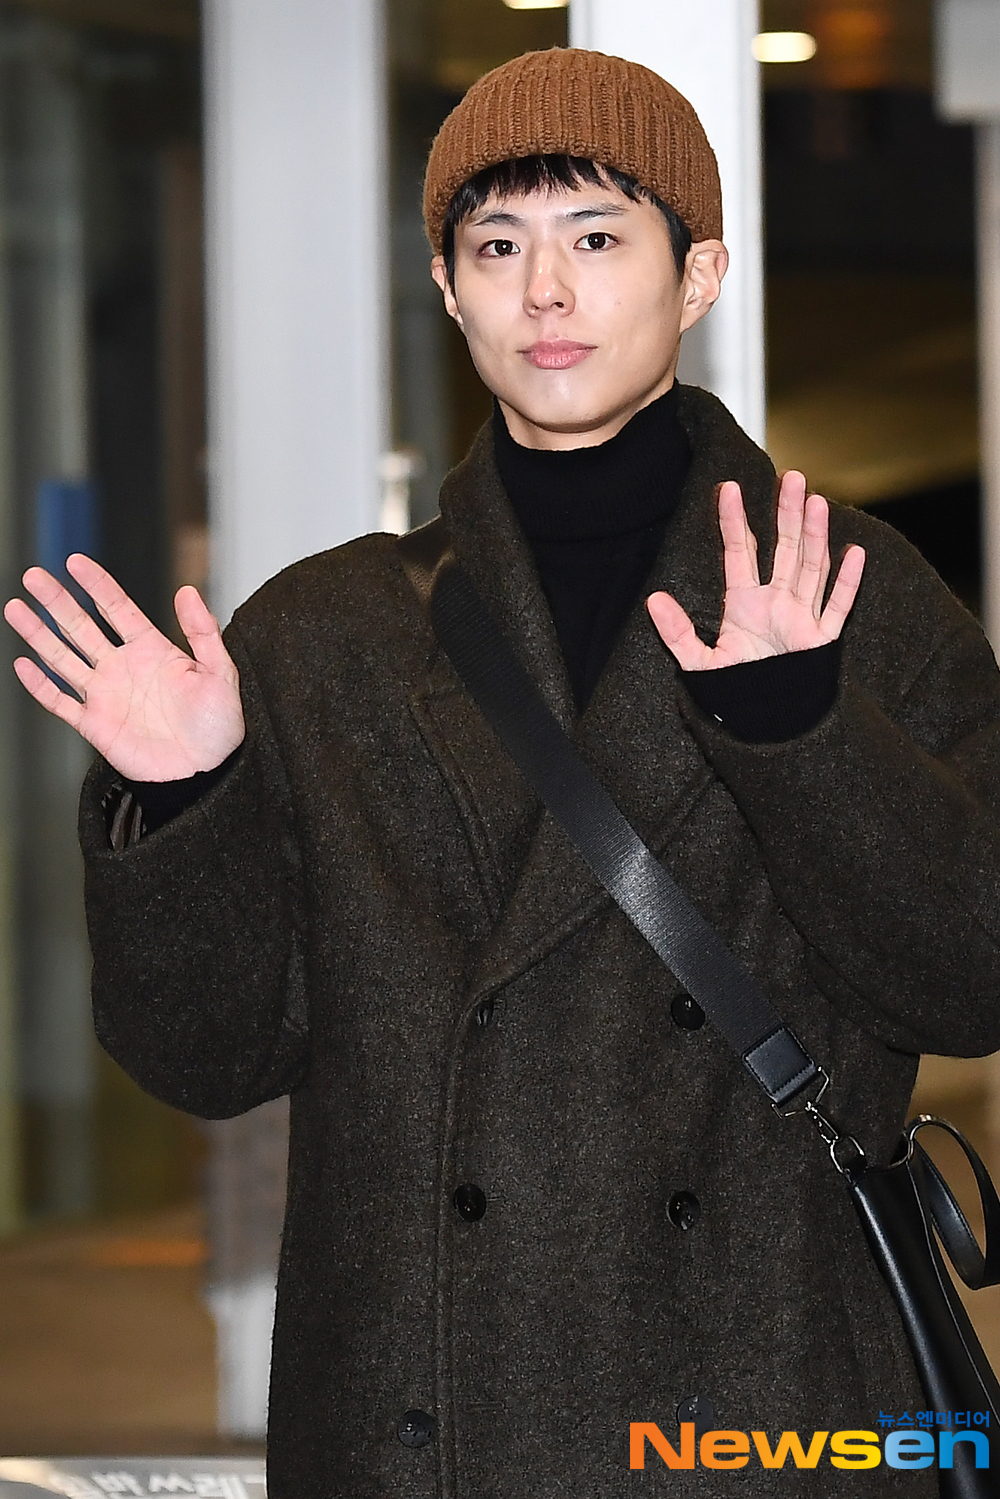 Actor Park Bo-gum (PARK BO GUM) departed for Nagoya, Japan, on December 4th (Wednesday) through Incheon International Airport in Unseo-dong, Jung-gu, Incheon, on the afternoon of December 3rd to attend the 2019 MAMA (Mnet Asian Music Awards 2019 Mnet Asian Music Awards) schedule.Actor Park Bo-gum (PARK BO GUM) is leaving for Japan.exponential earthquake